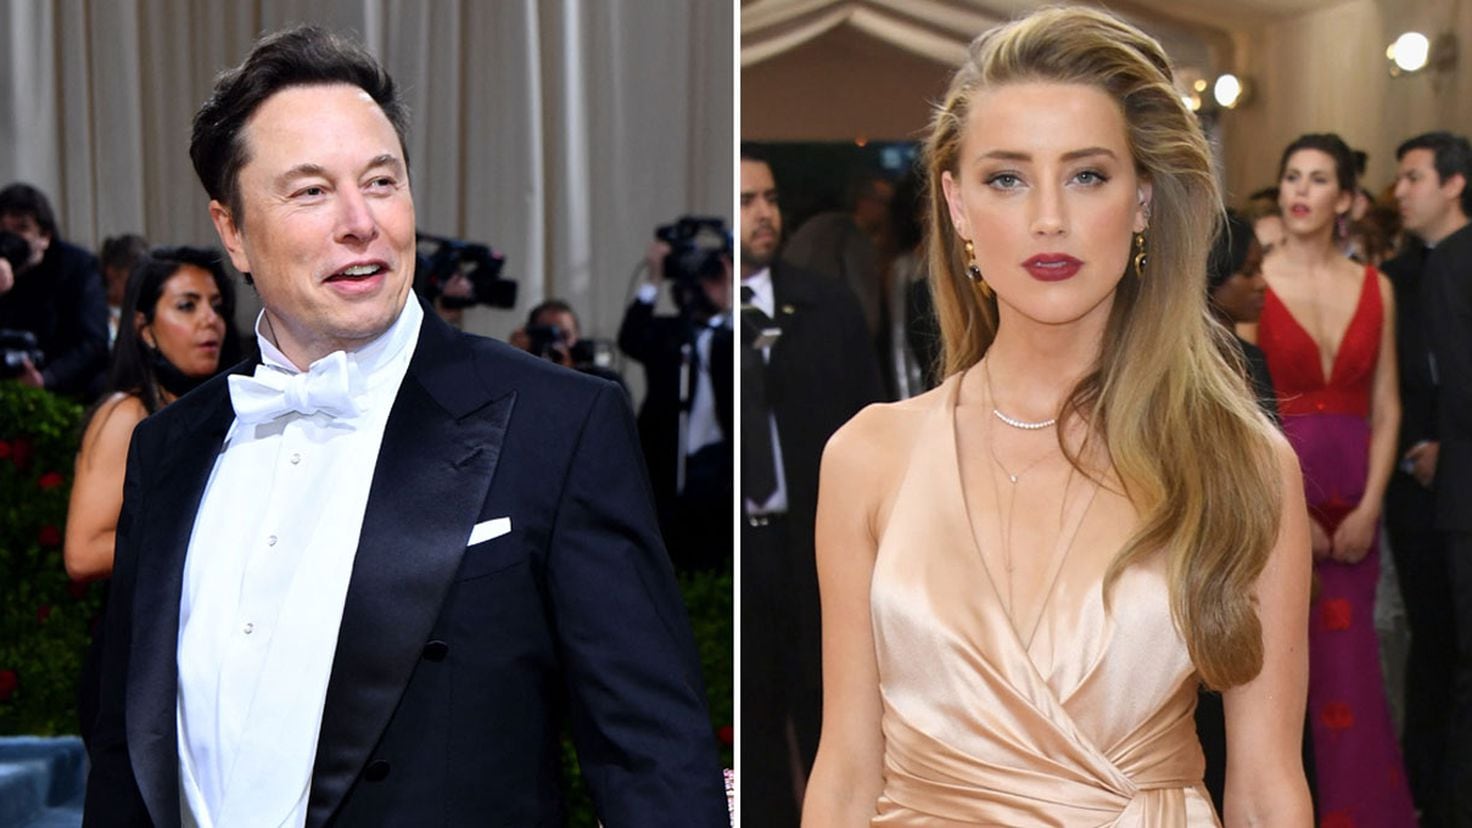 Elon Musk describes his relationship with Amber Heard as “brutal” and “toxic”